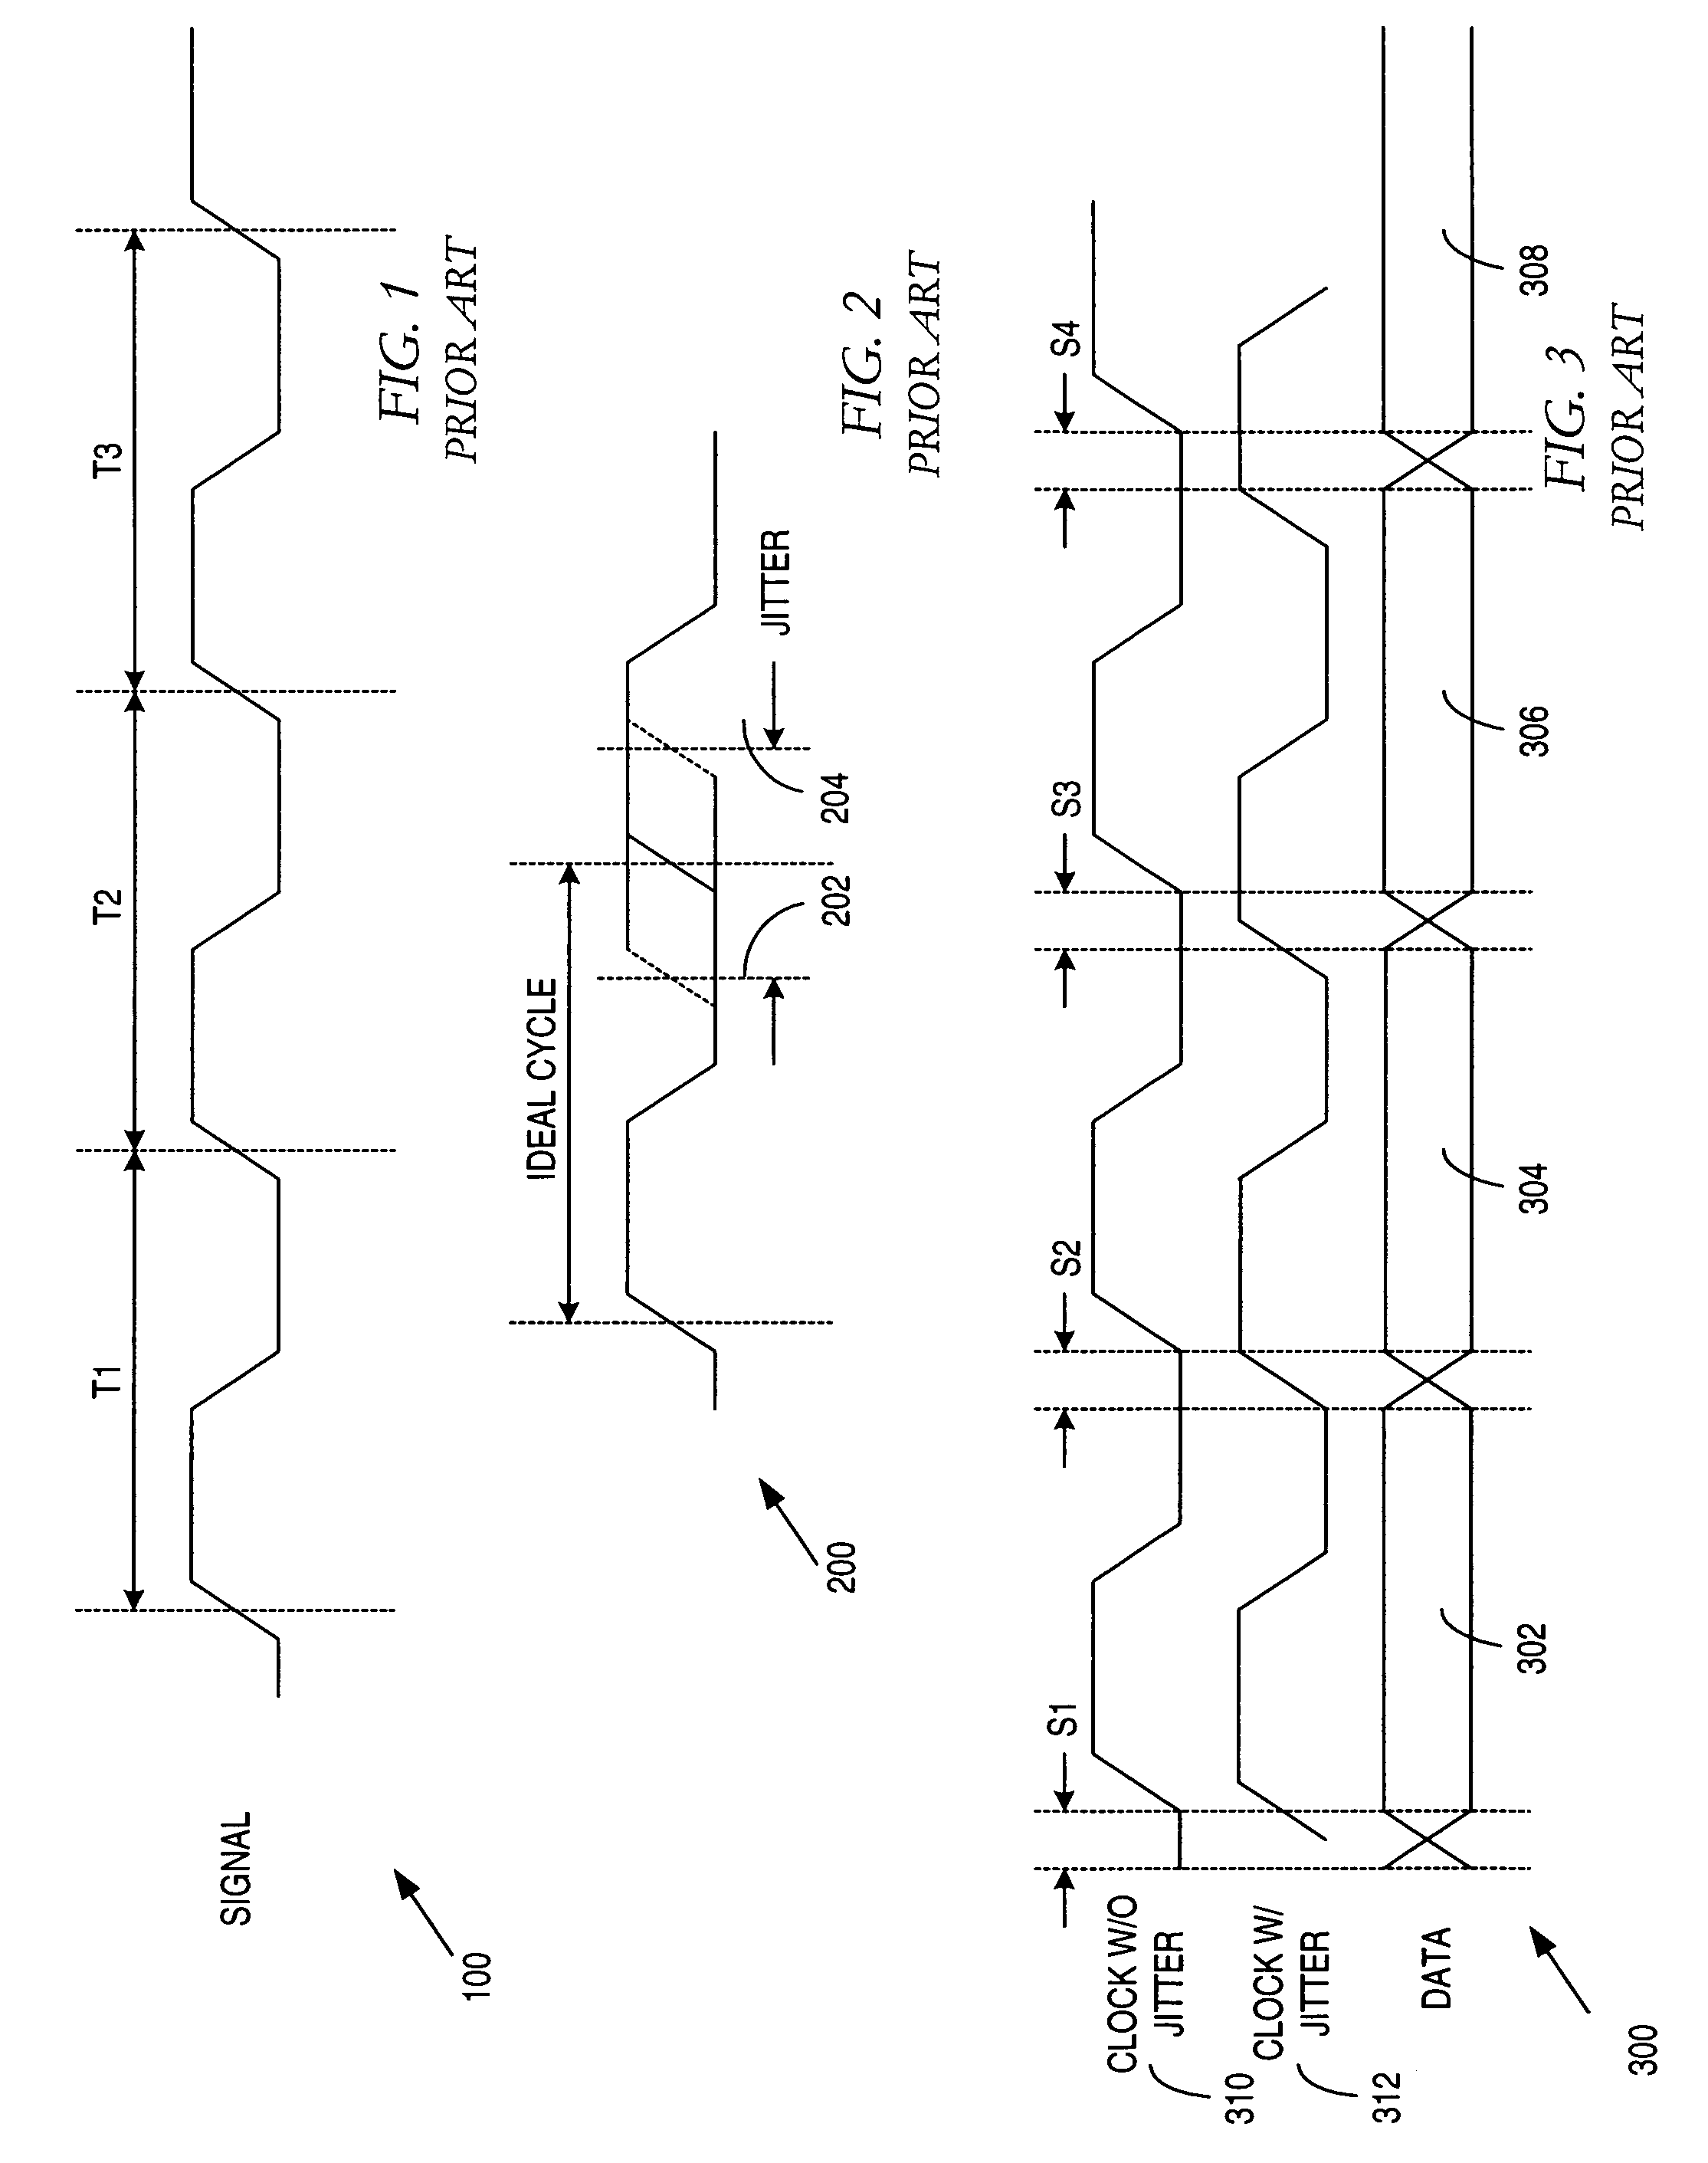 Method and apparatus for a reference clock buffer system